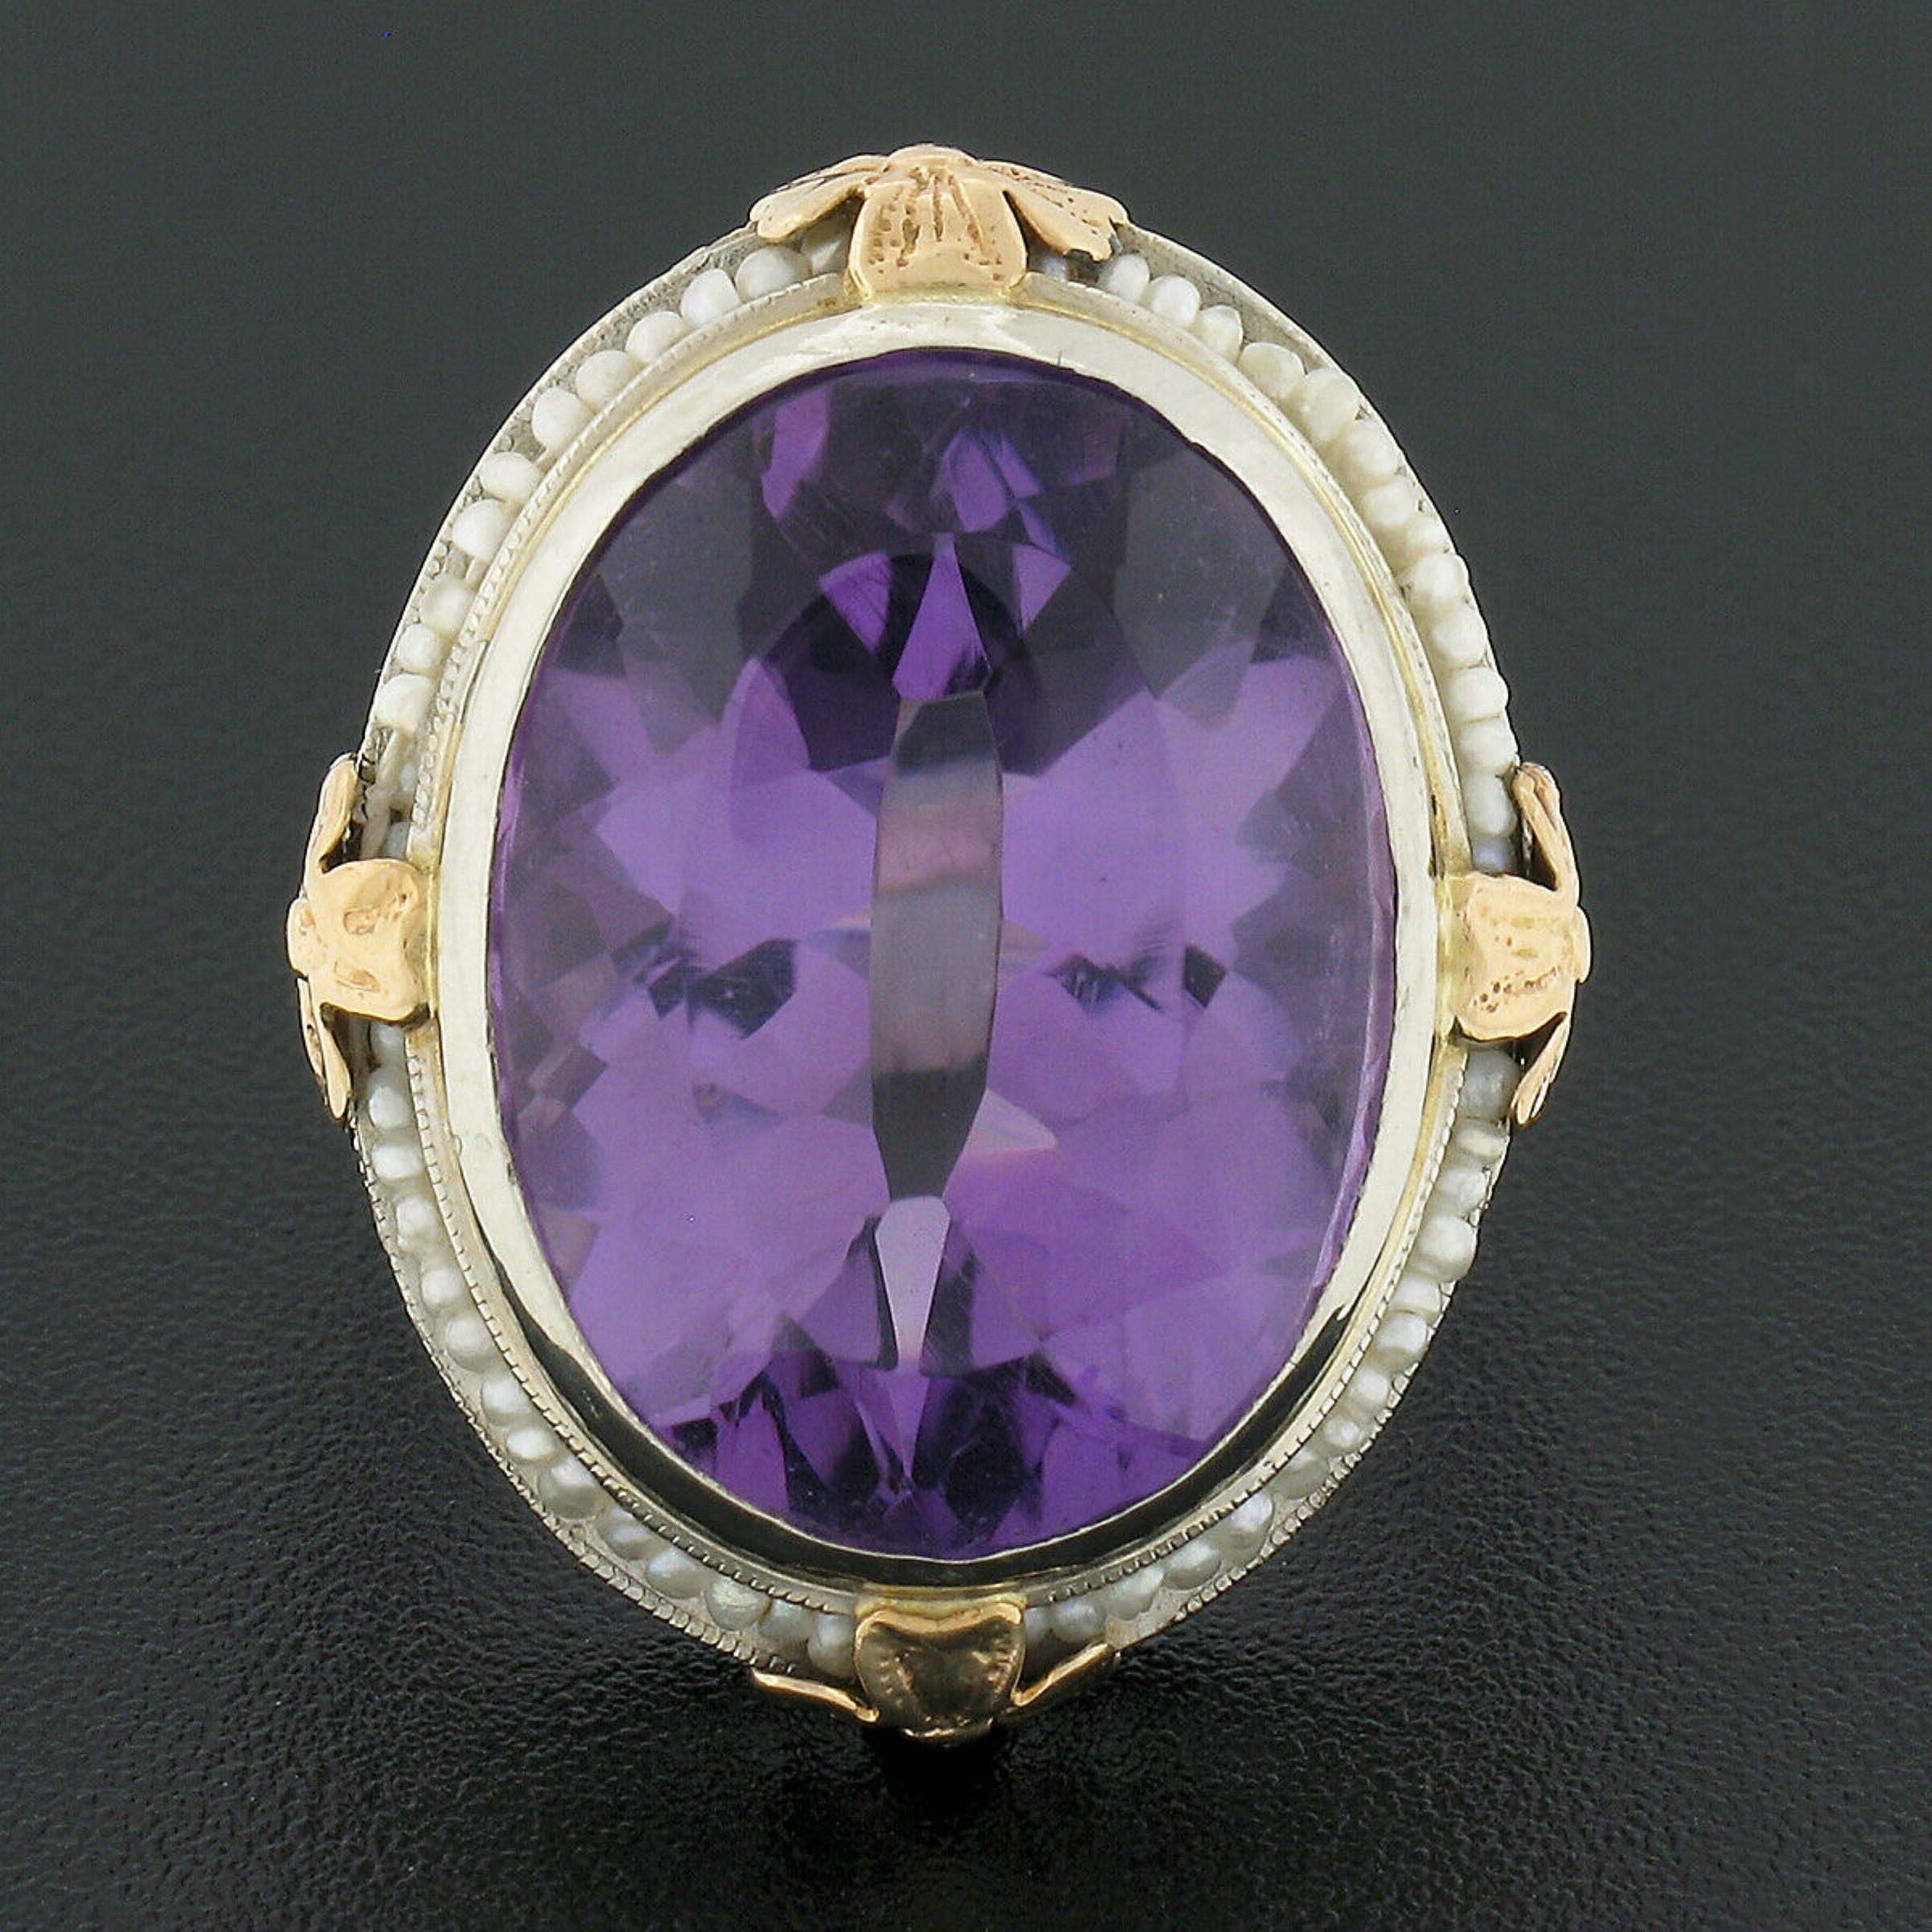 This magnificent antique ring is crafted in solid 14k white gold and features a large oval cut amethyst neatly bezel set at its center. The stone stands out with its gorgeous medium purple color and large size, weighing approximately 15 carats, and